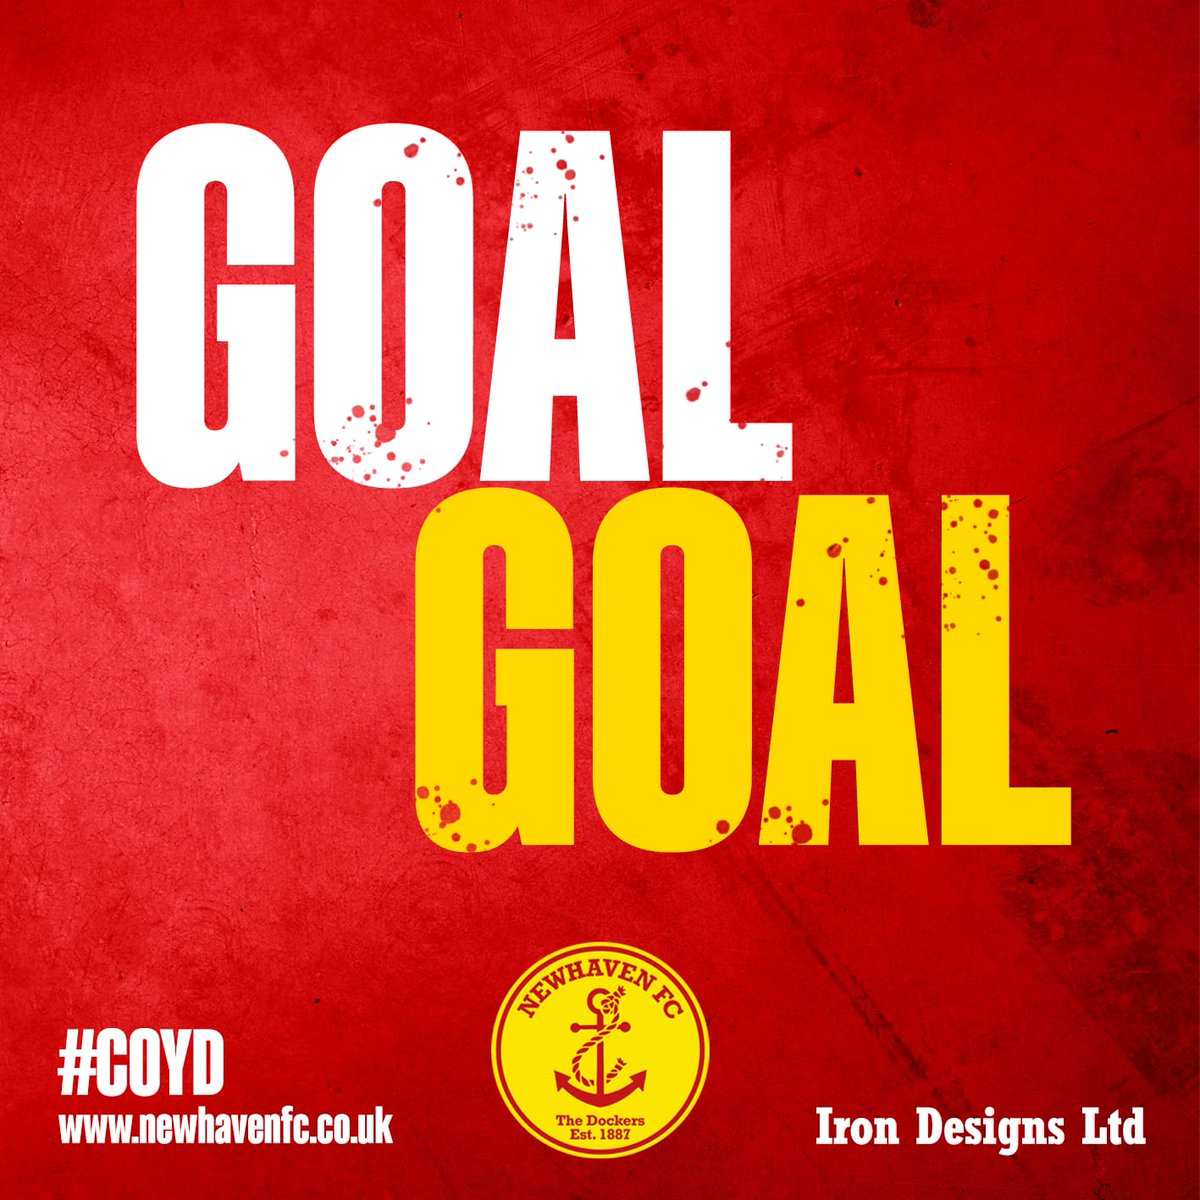 75 mins
4-1 Hassocks
This is absolutely awful from us, but full credit to ten-man Hassocks who are absolutely dominant.